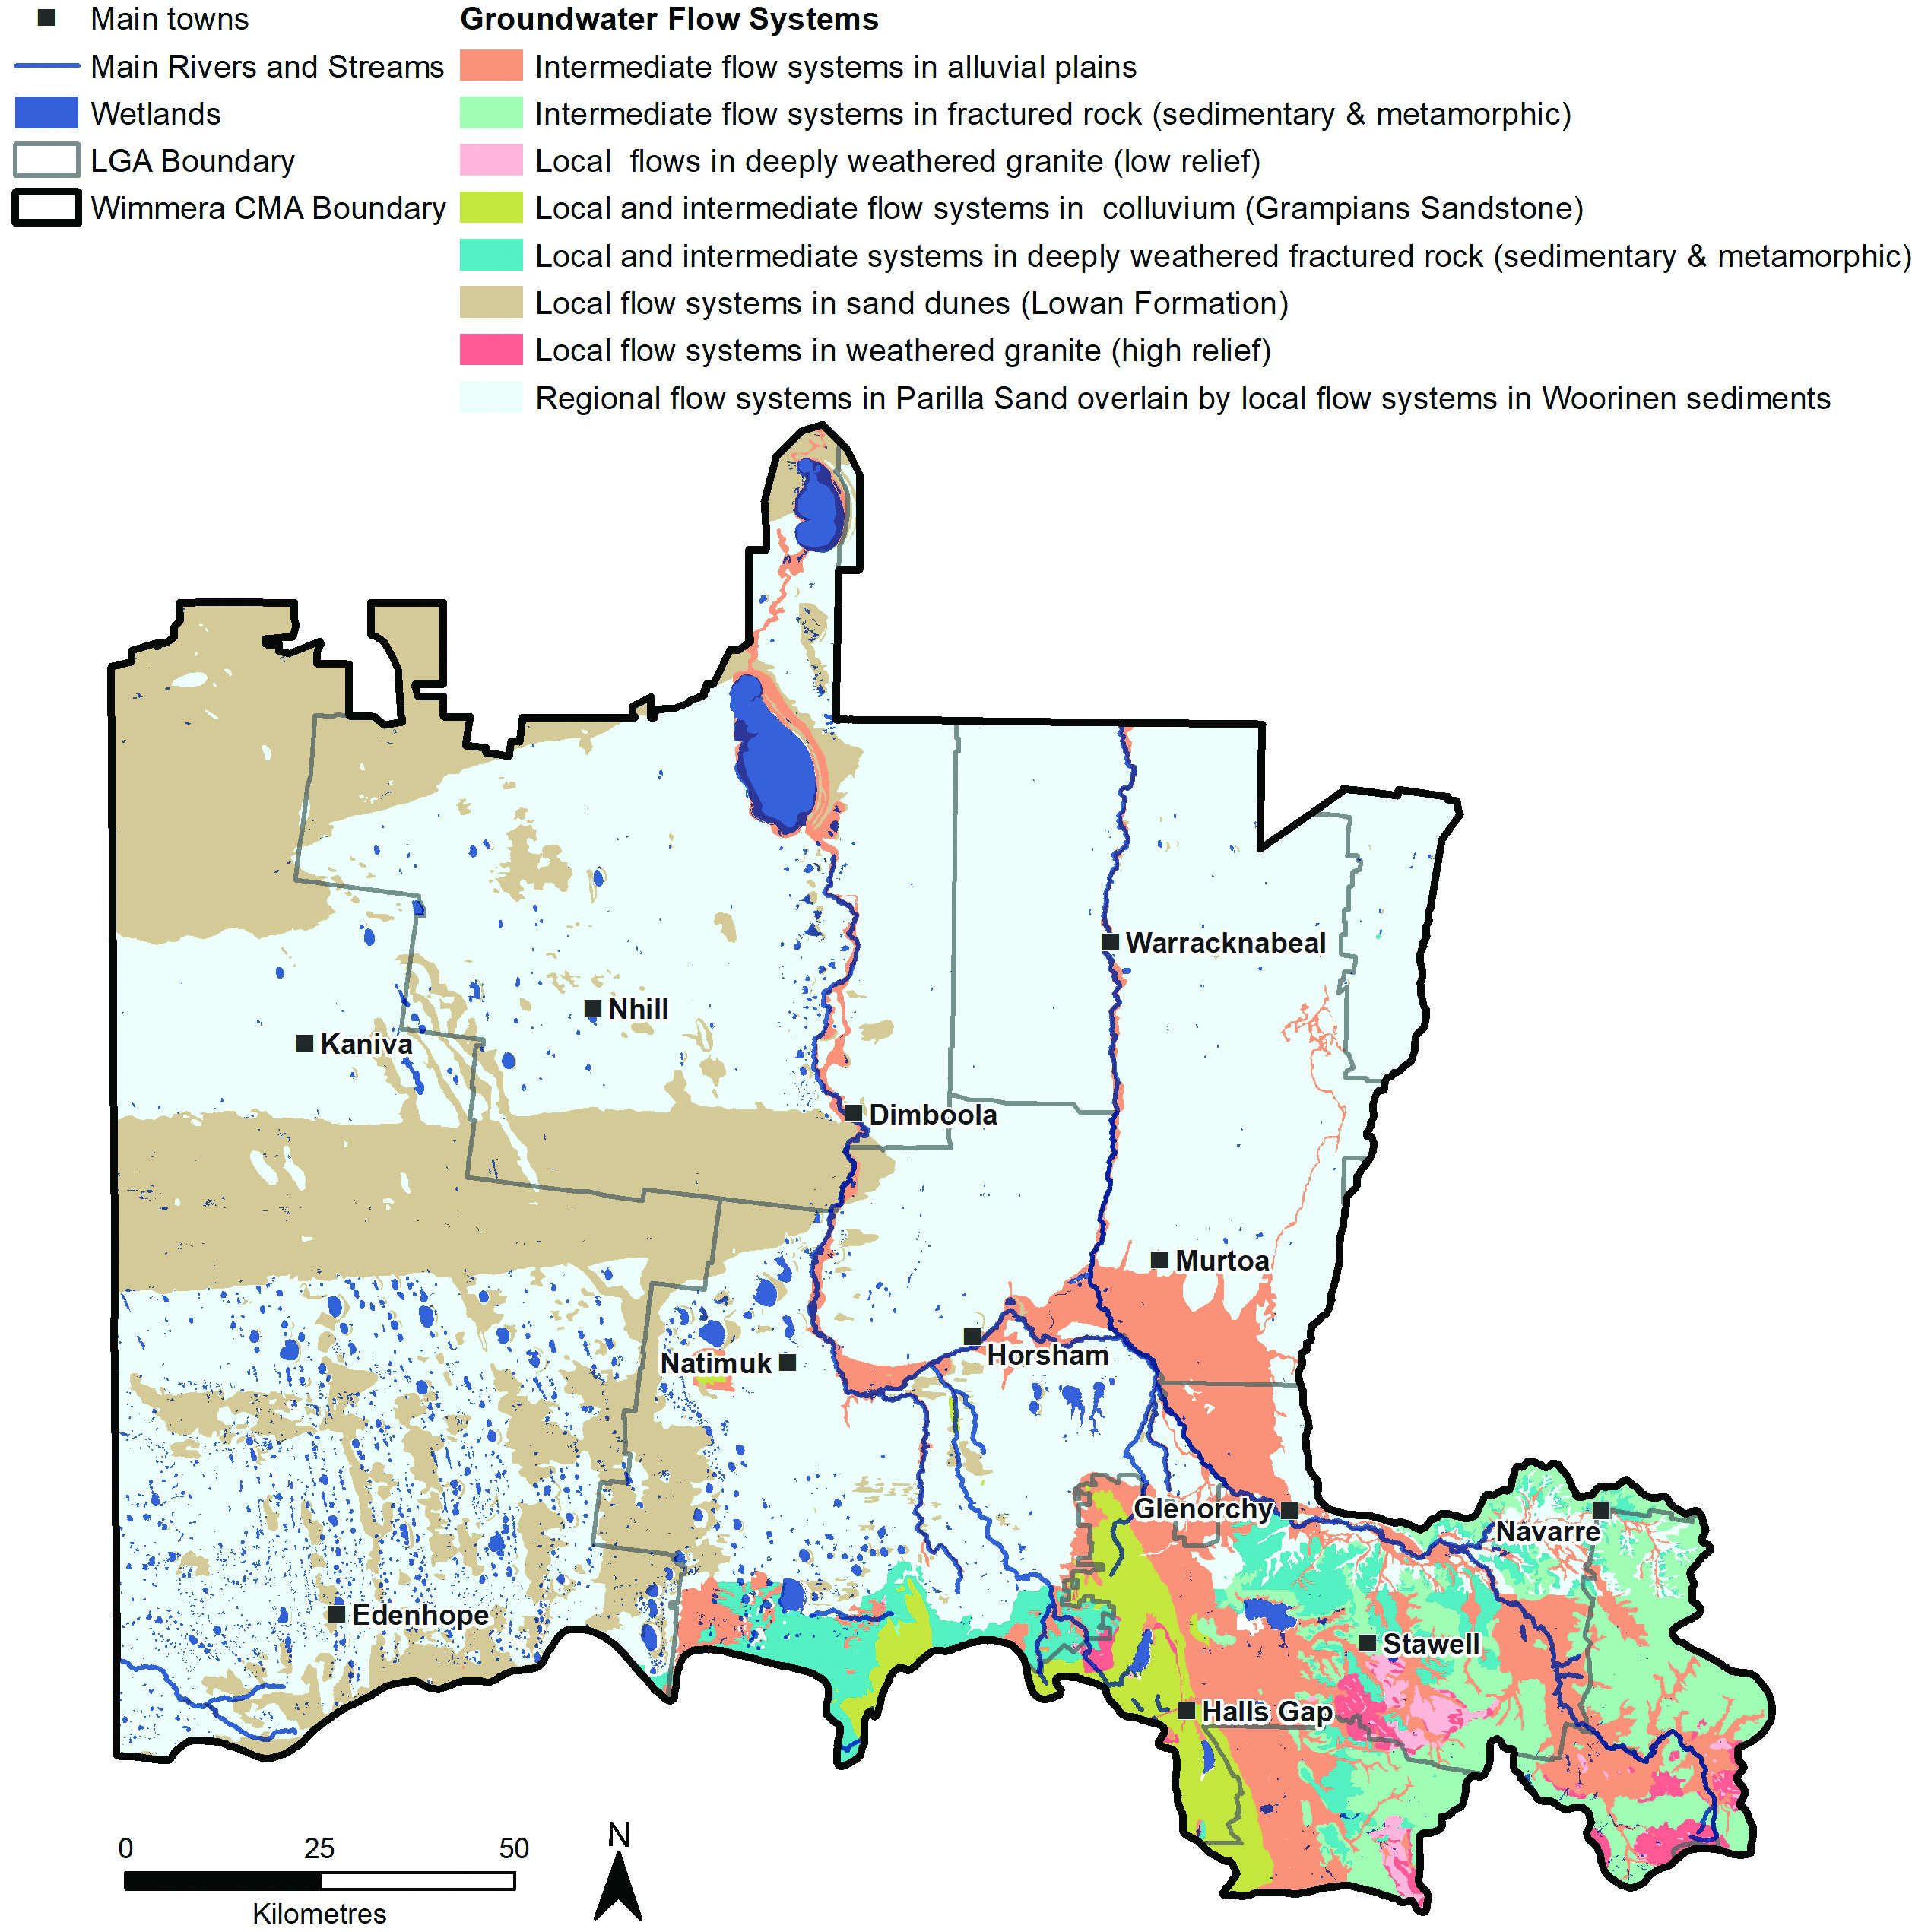 Figure 8: Groundwater flow systems in the Wimmera